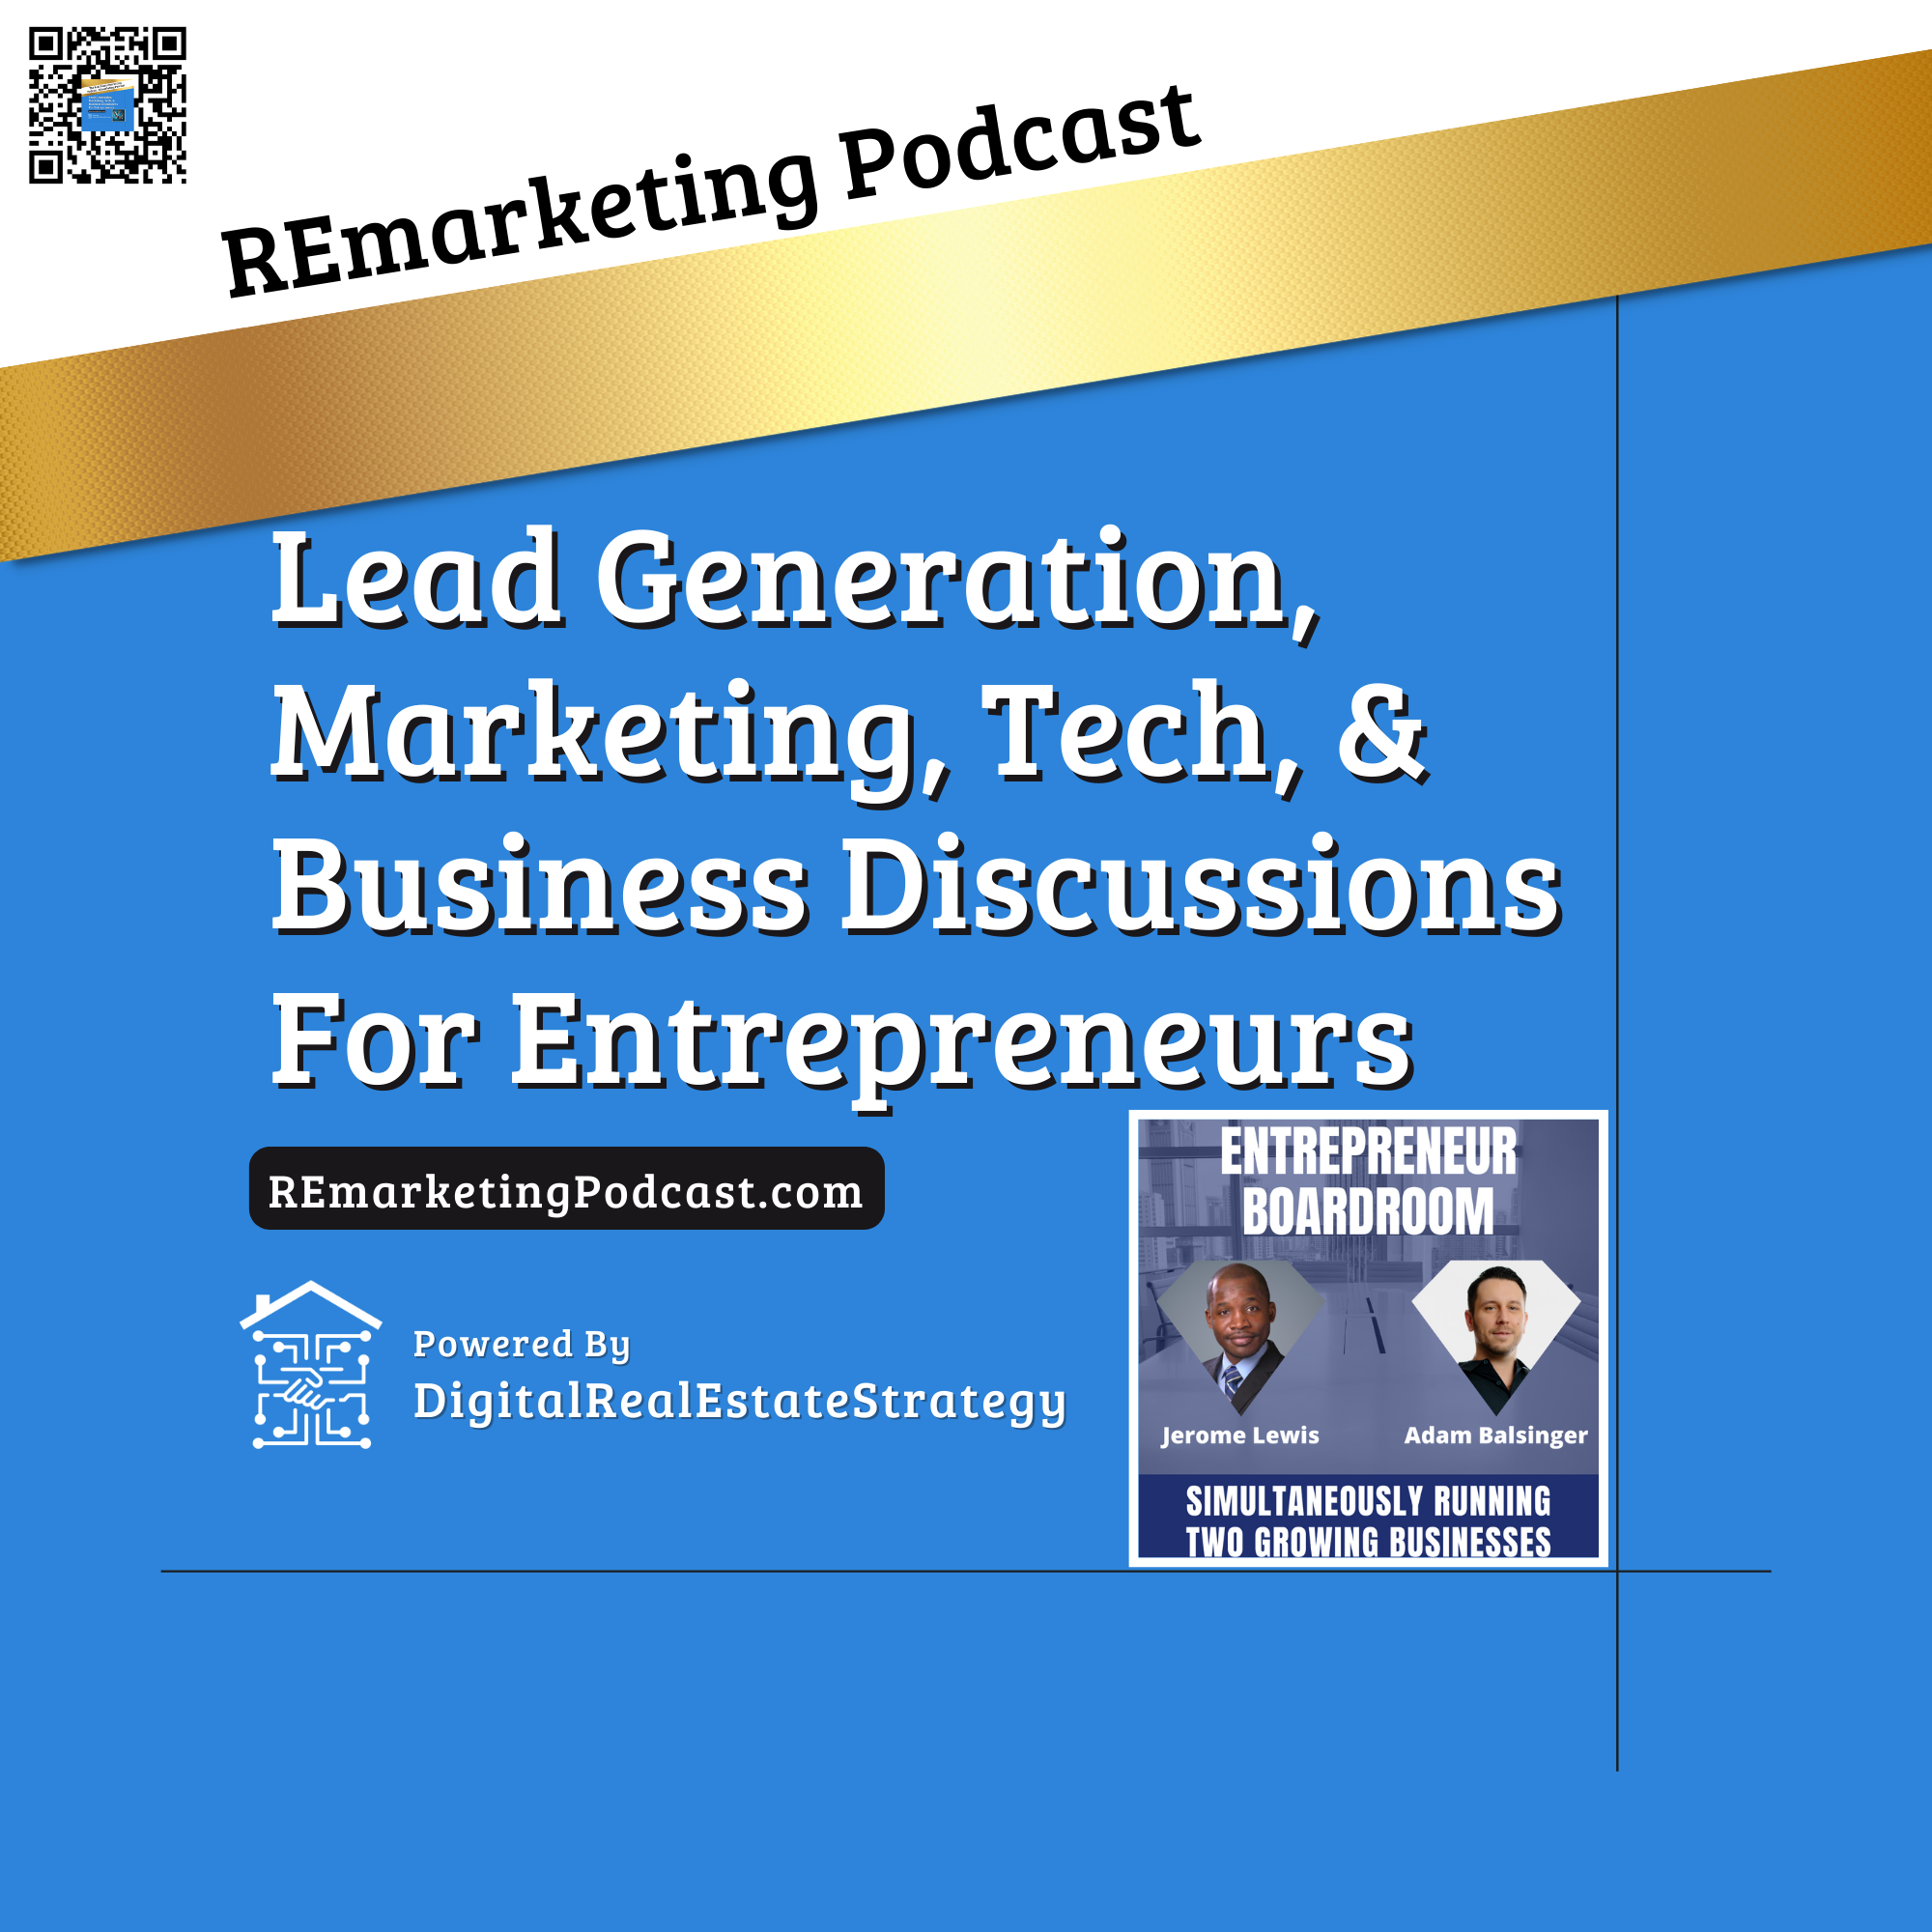 Artwork for podcast The Real Estate Marketing Implementation Podcast, REmarketing Podcast